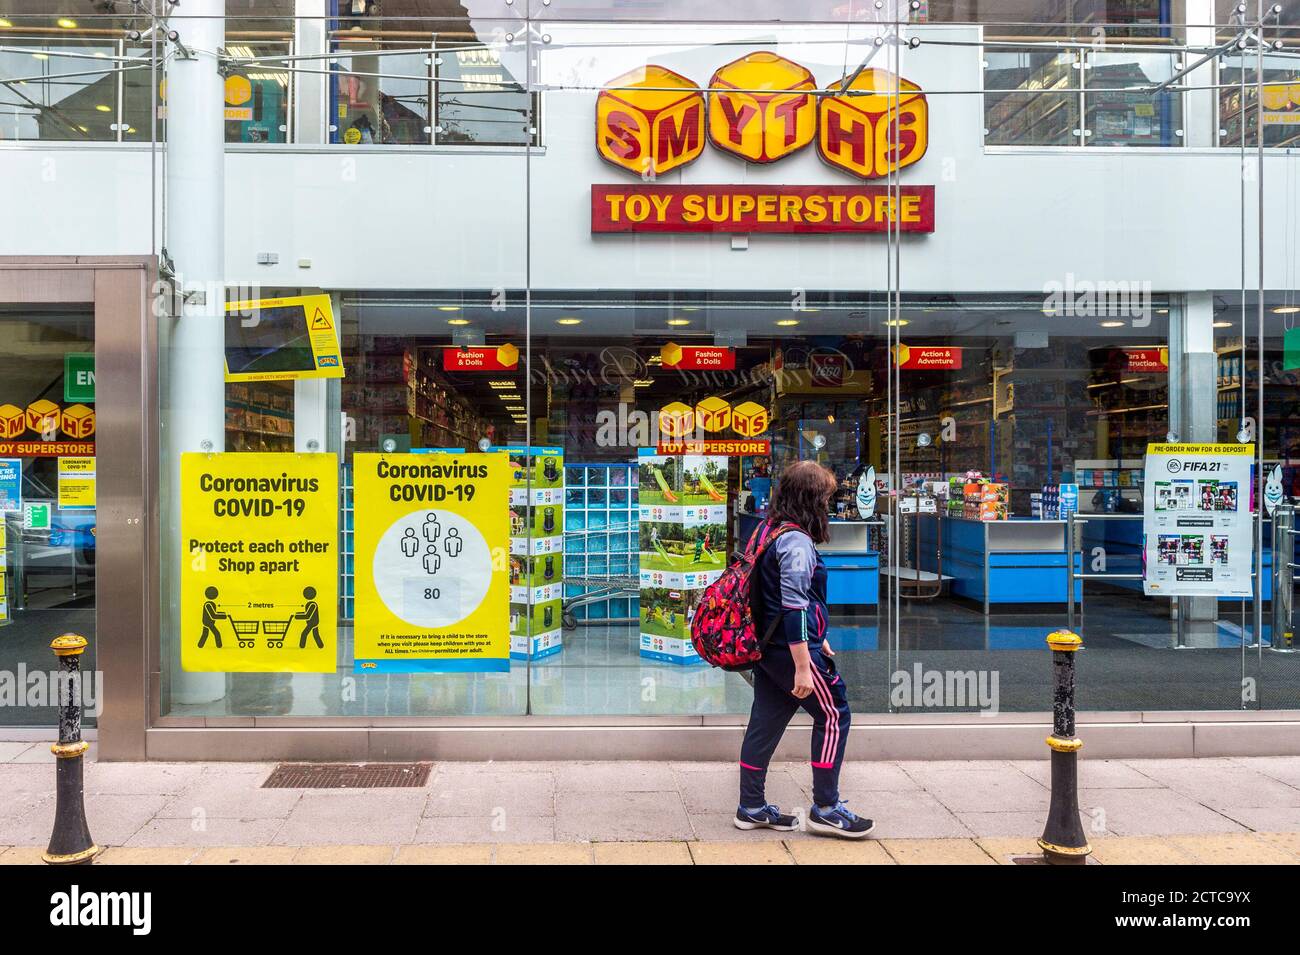 Cork, Ireland. 22nd Sep, 2020. Smyths Toys has announced it is cancelling its popular Christmas deal where a customer receives €10 off when they spend €50. The cancellation is due to COVID-19 and the large crowds expected. Credit: AG News/Alamy Live News Stock Photo